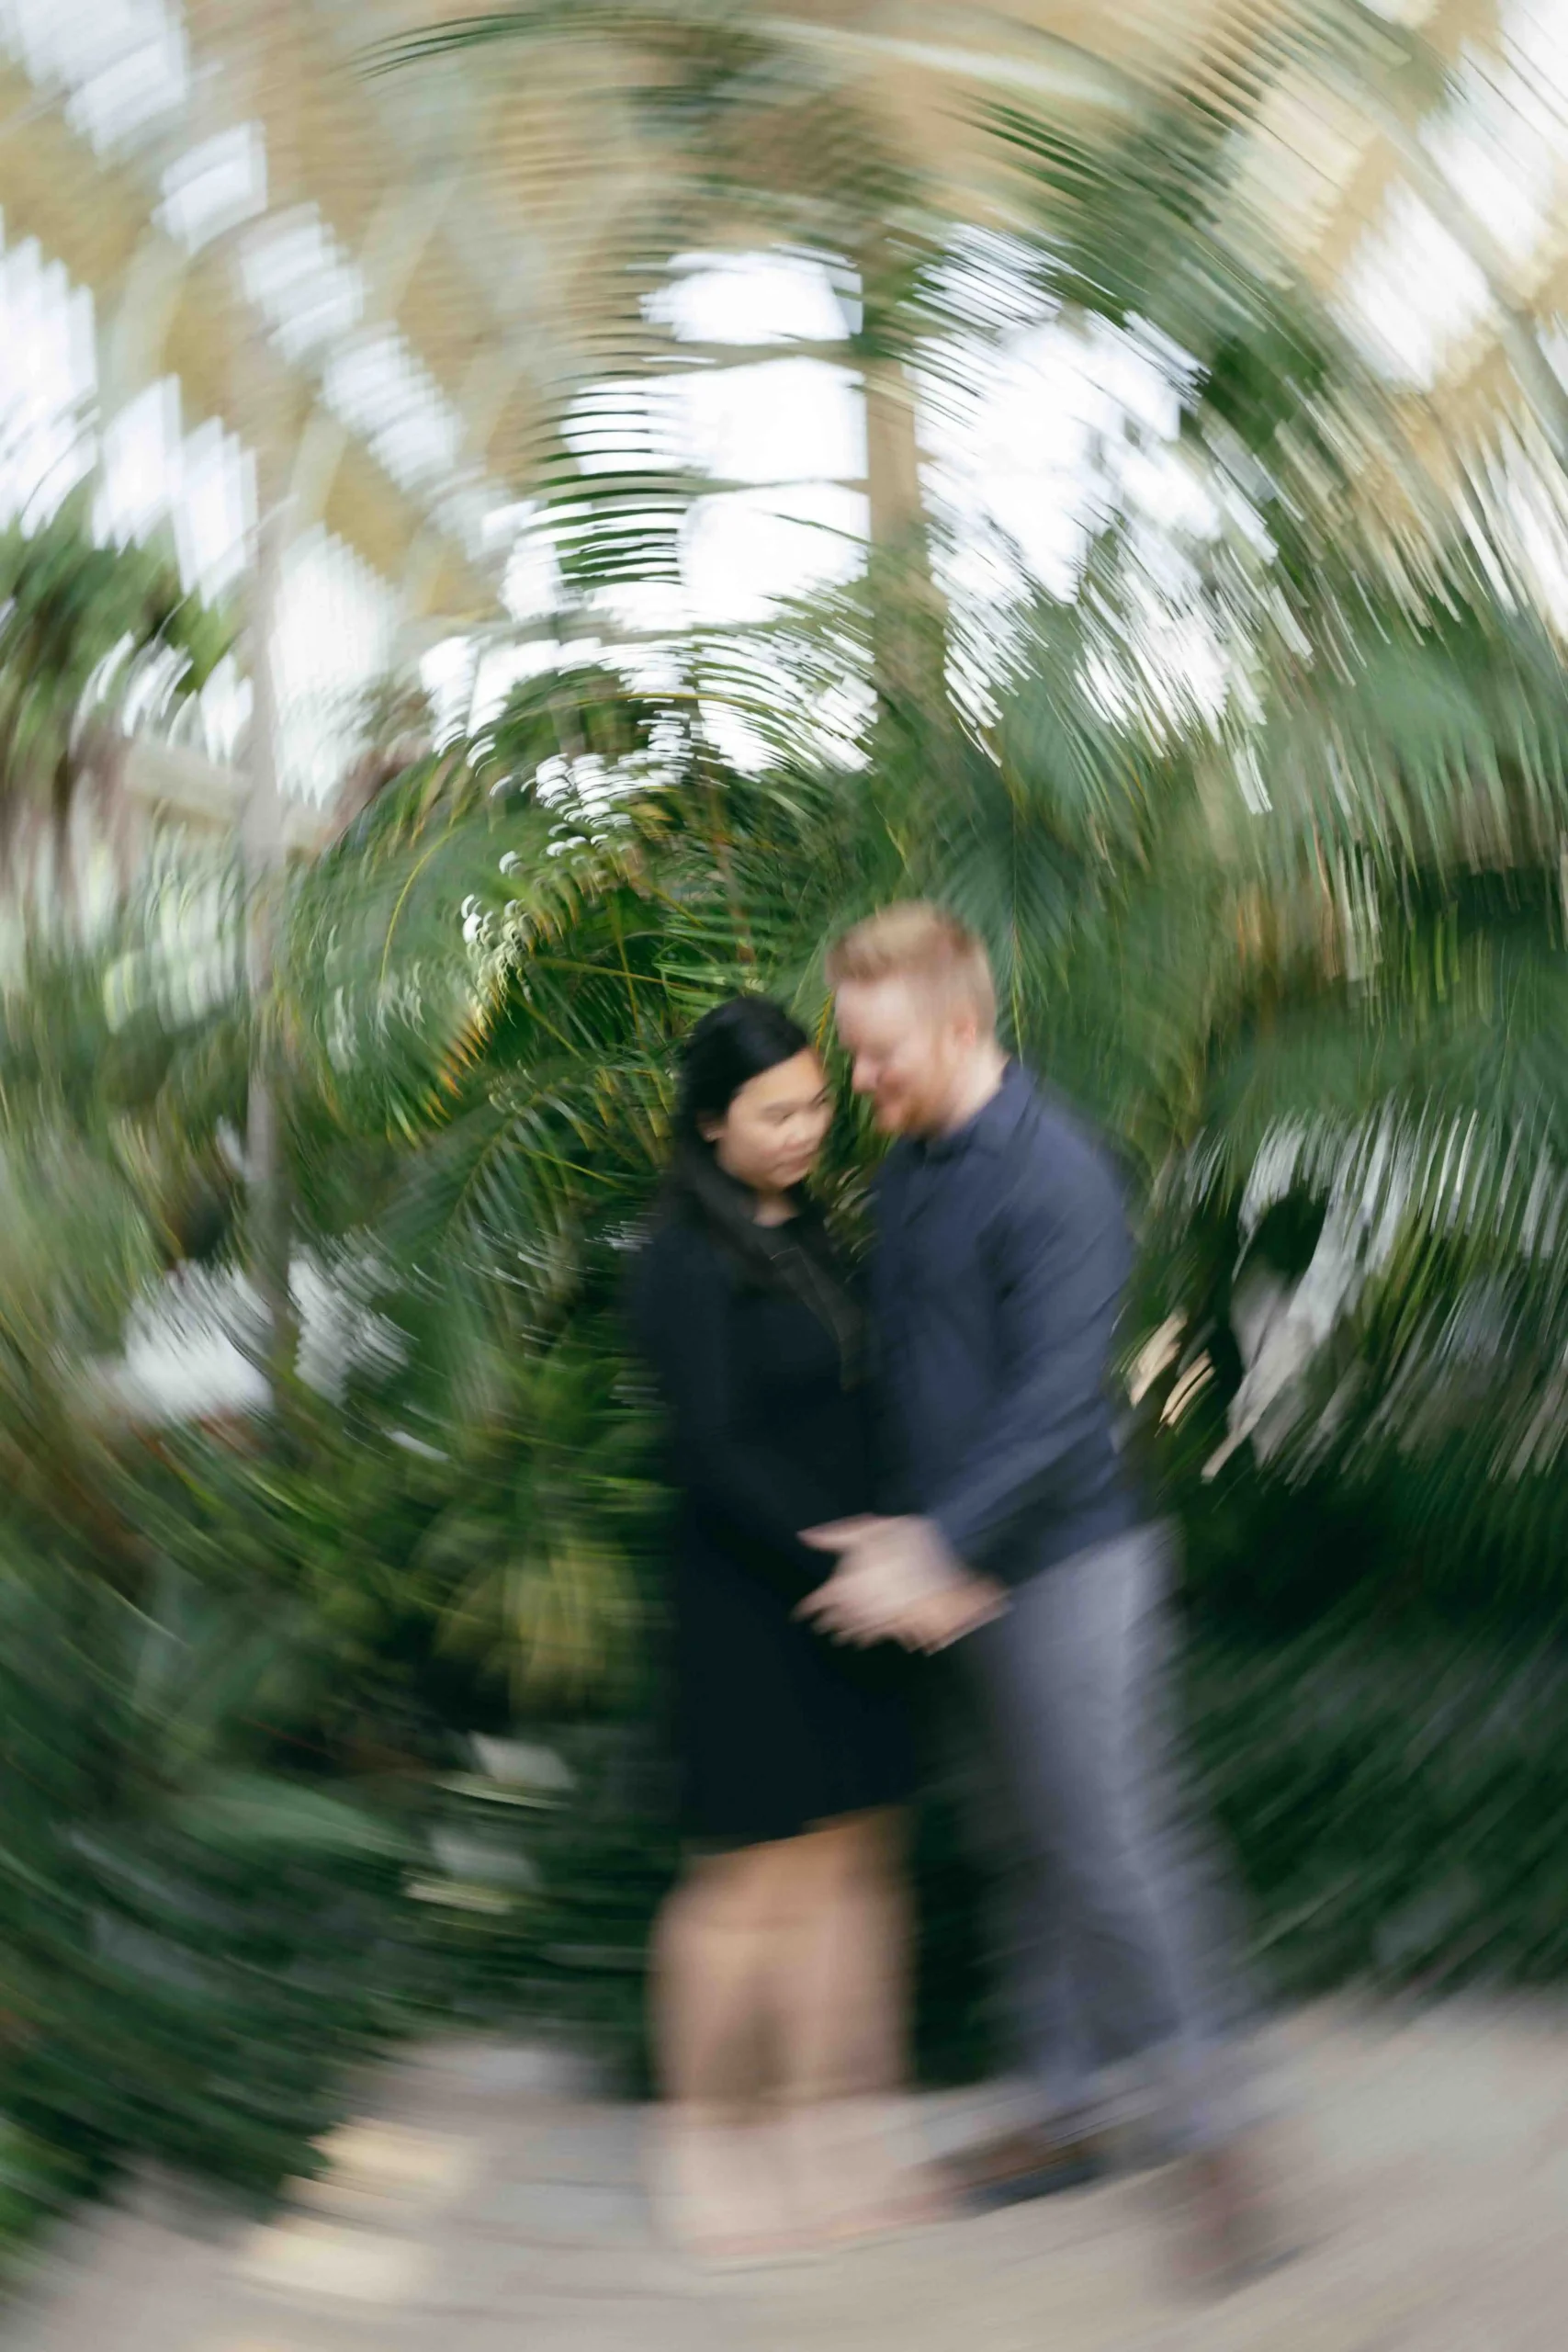 An engaged couple in a greenhouse shot with a motion blur photography style.